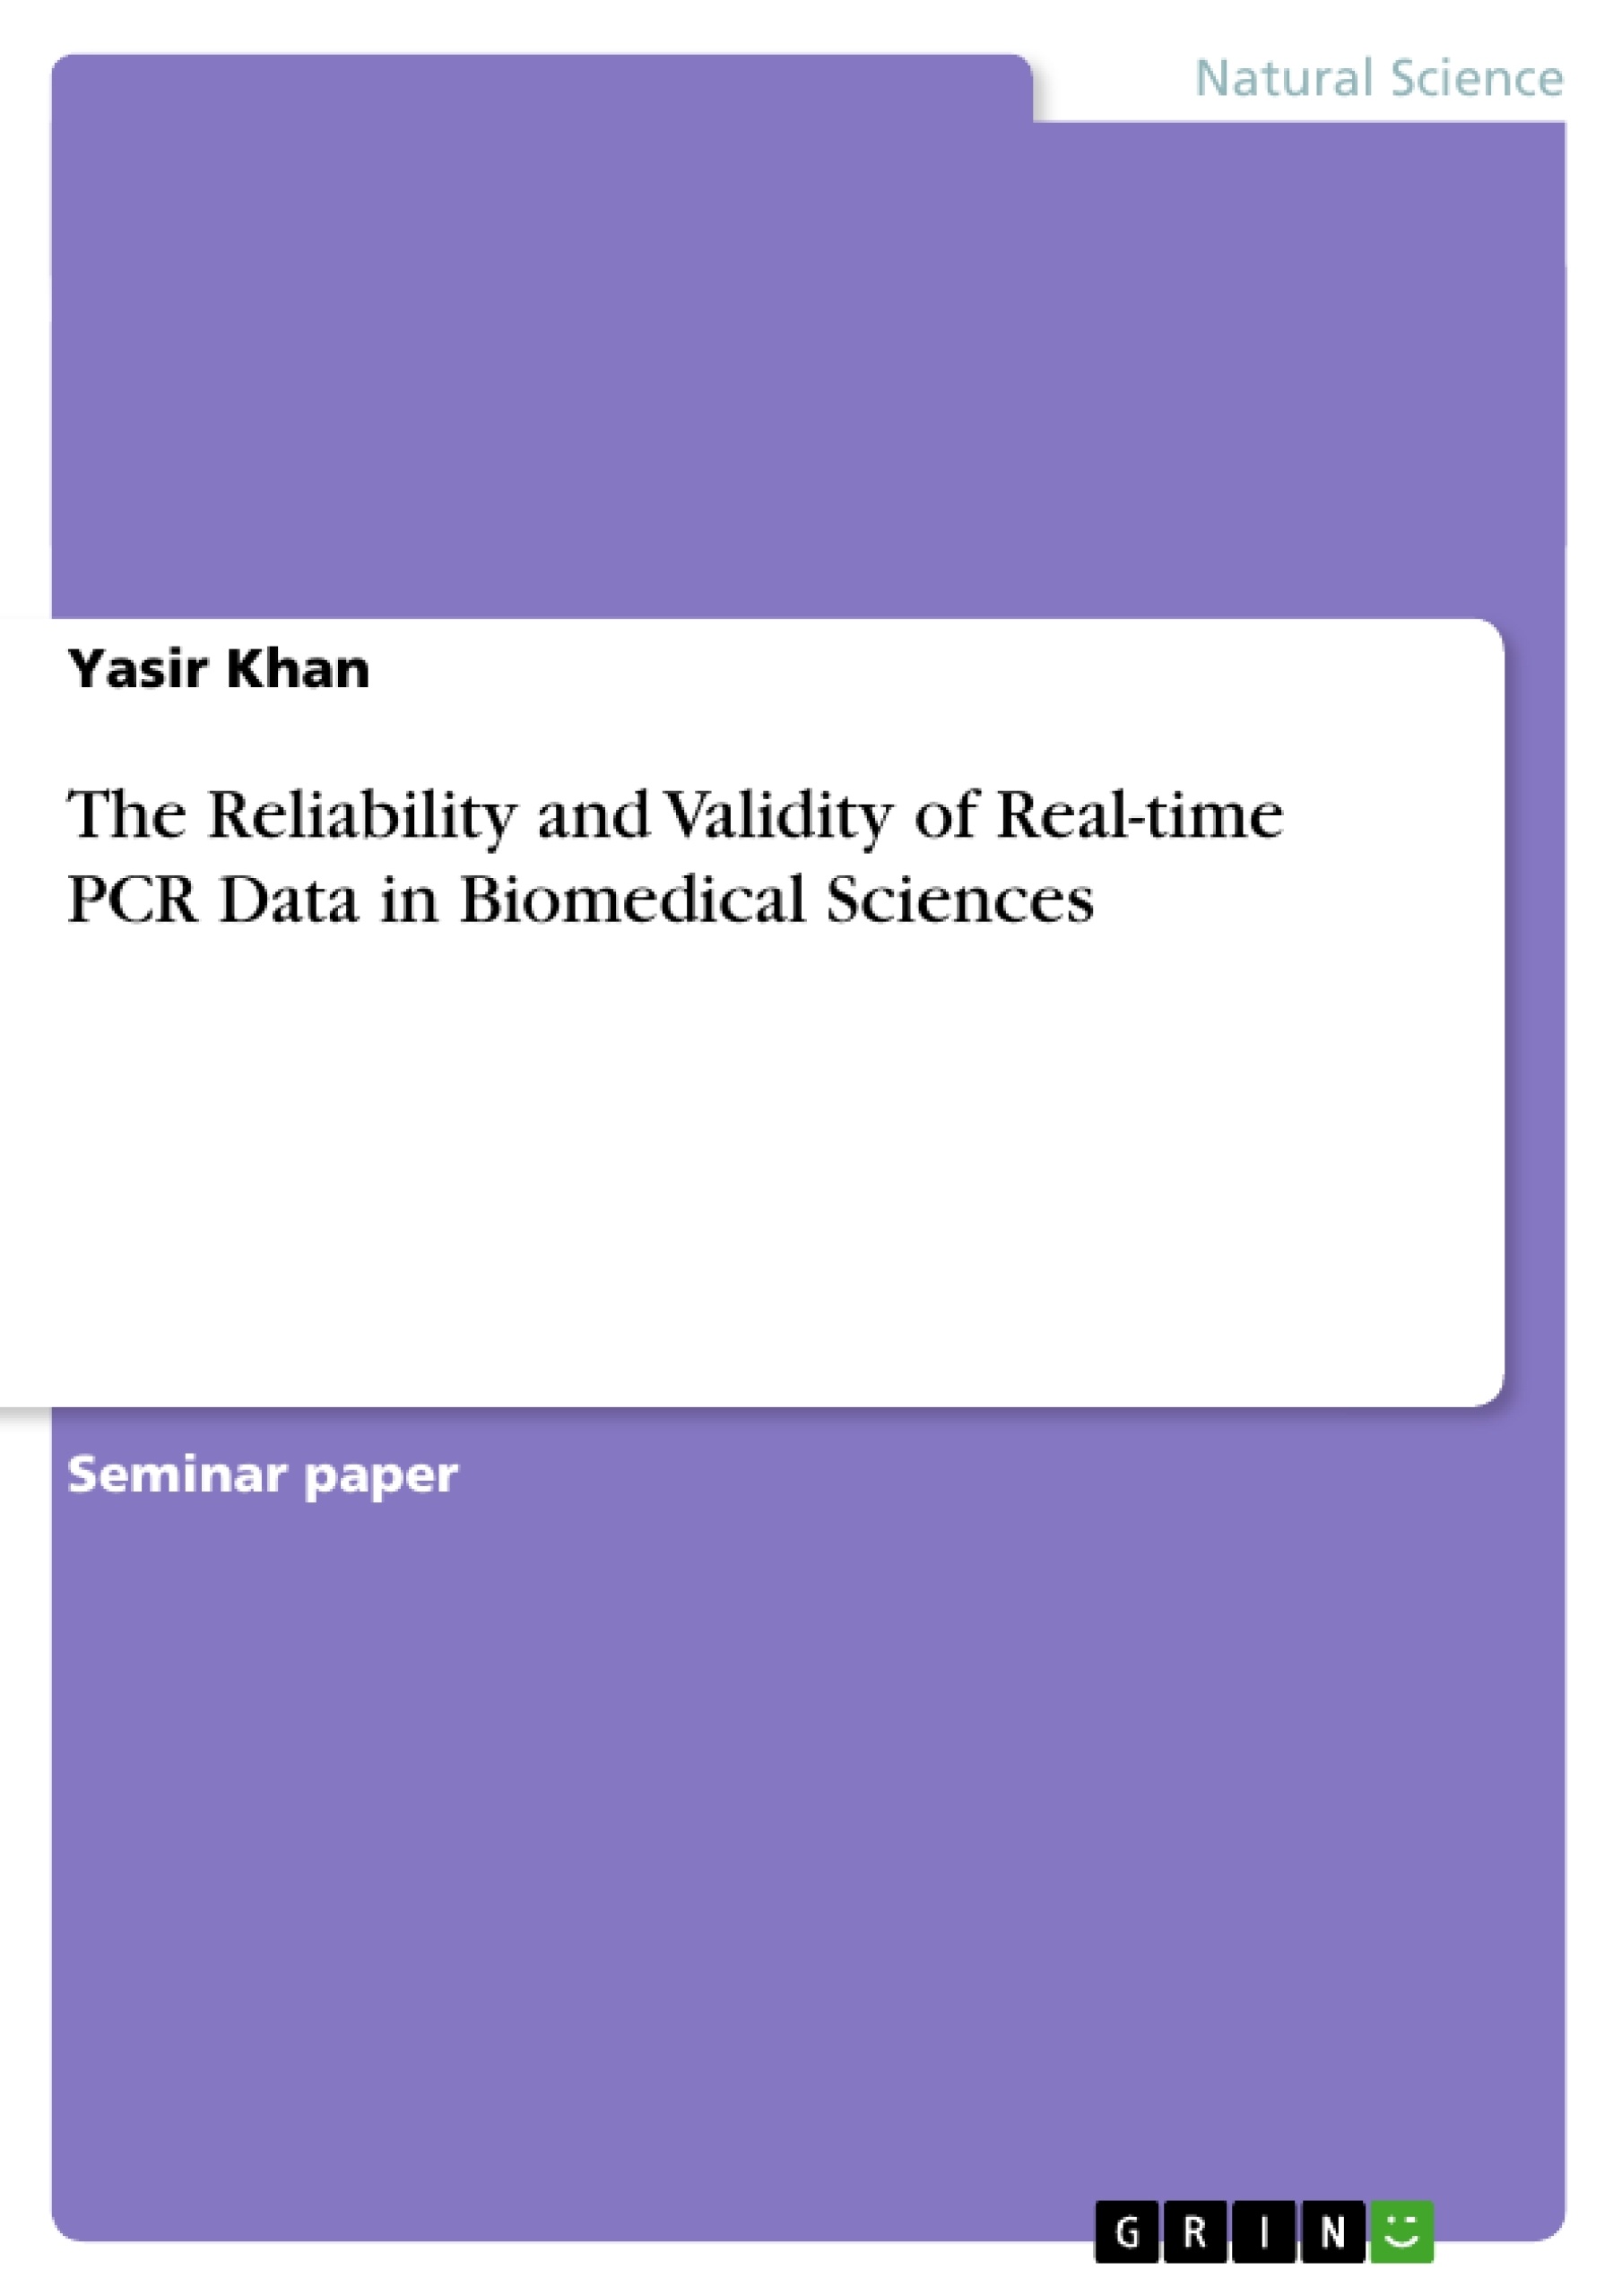 Titre: The Reliability and Validity of Real-time PCR Data in Biomedical Sciences